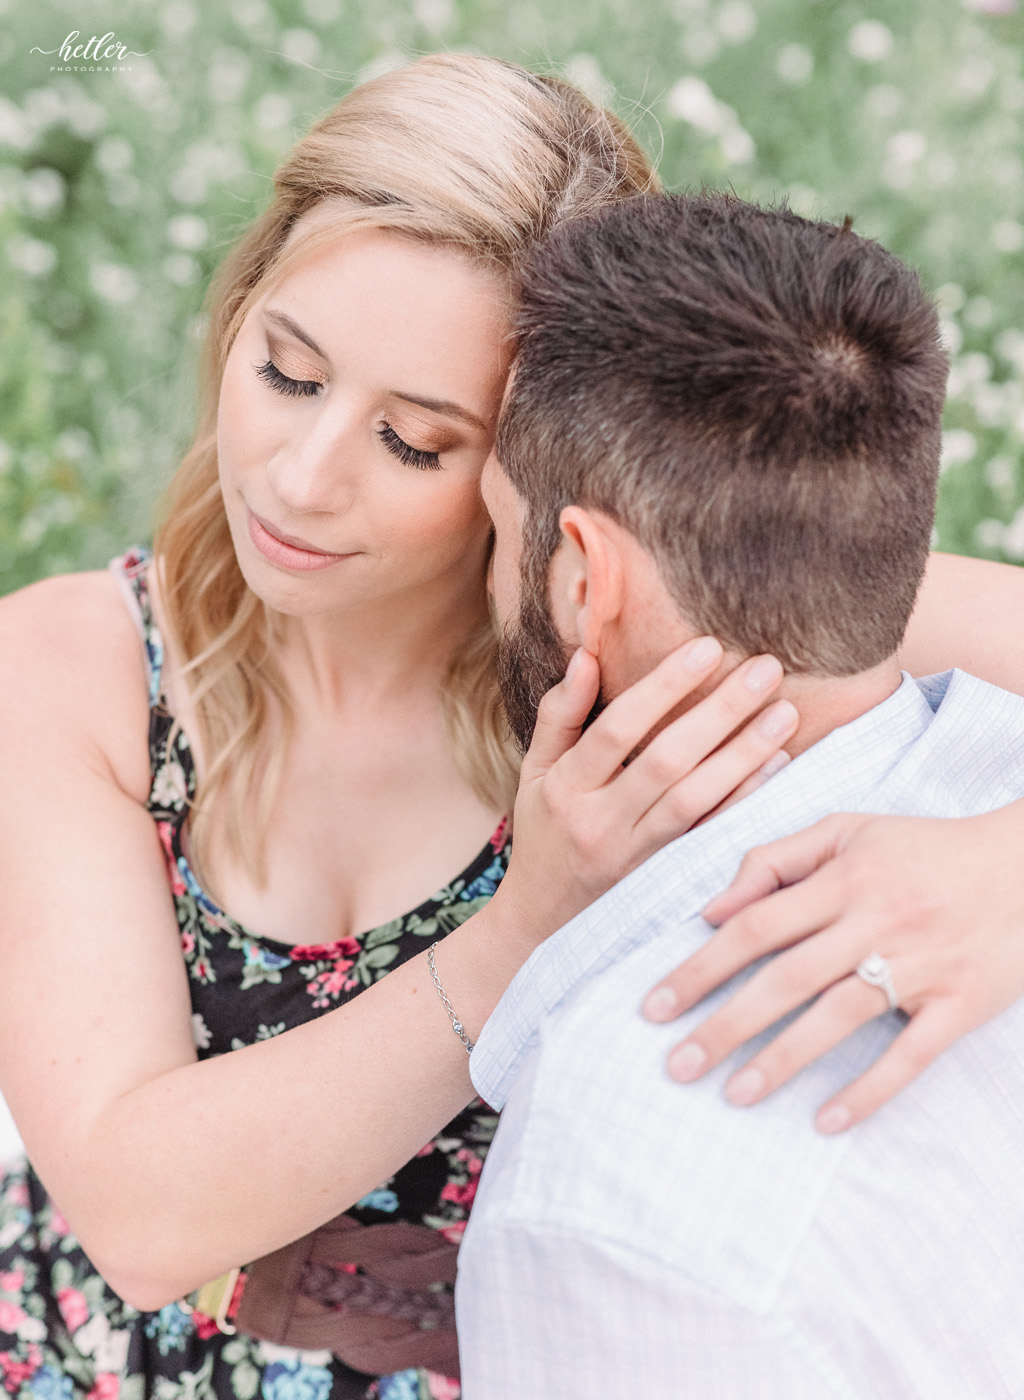 Grand Rapids lakeside summer engagement session